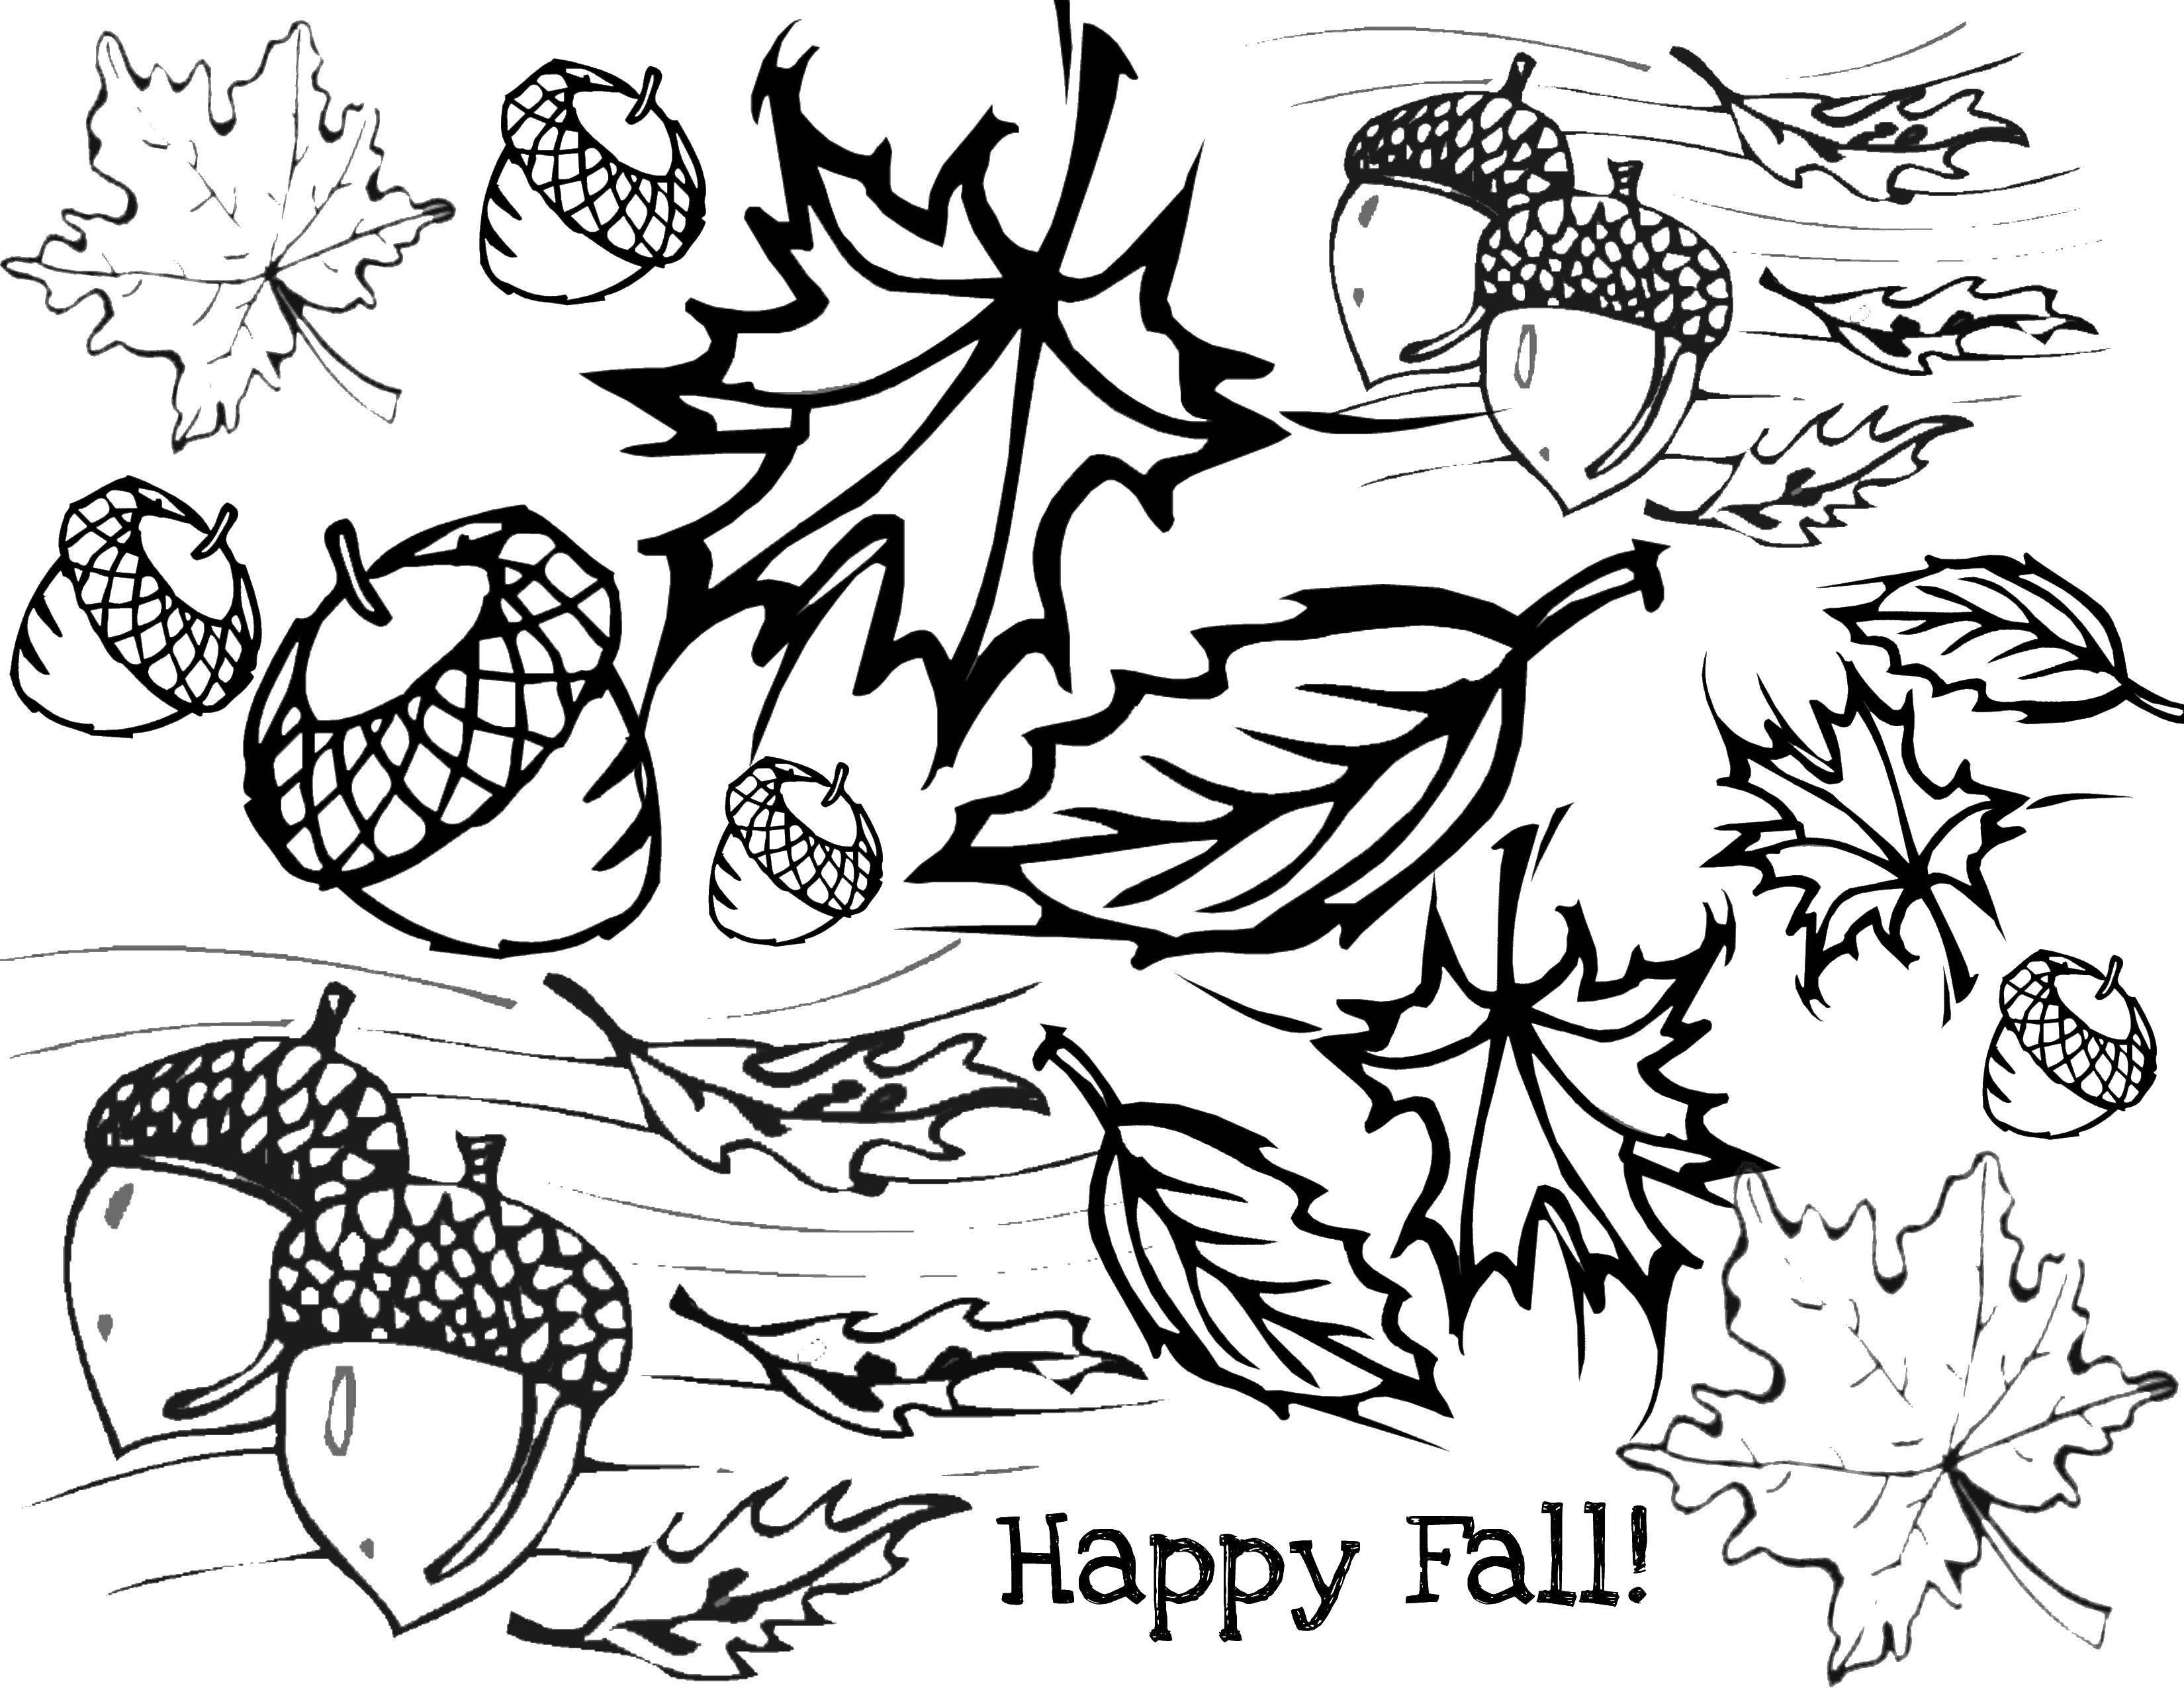 Coloring The wind is blowing acorns and leaves. Category Autumn leaves falling. Tags:  Autumn, leaves.